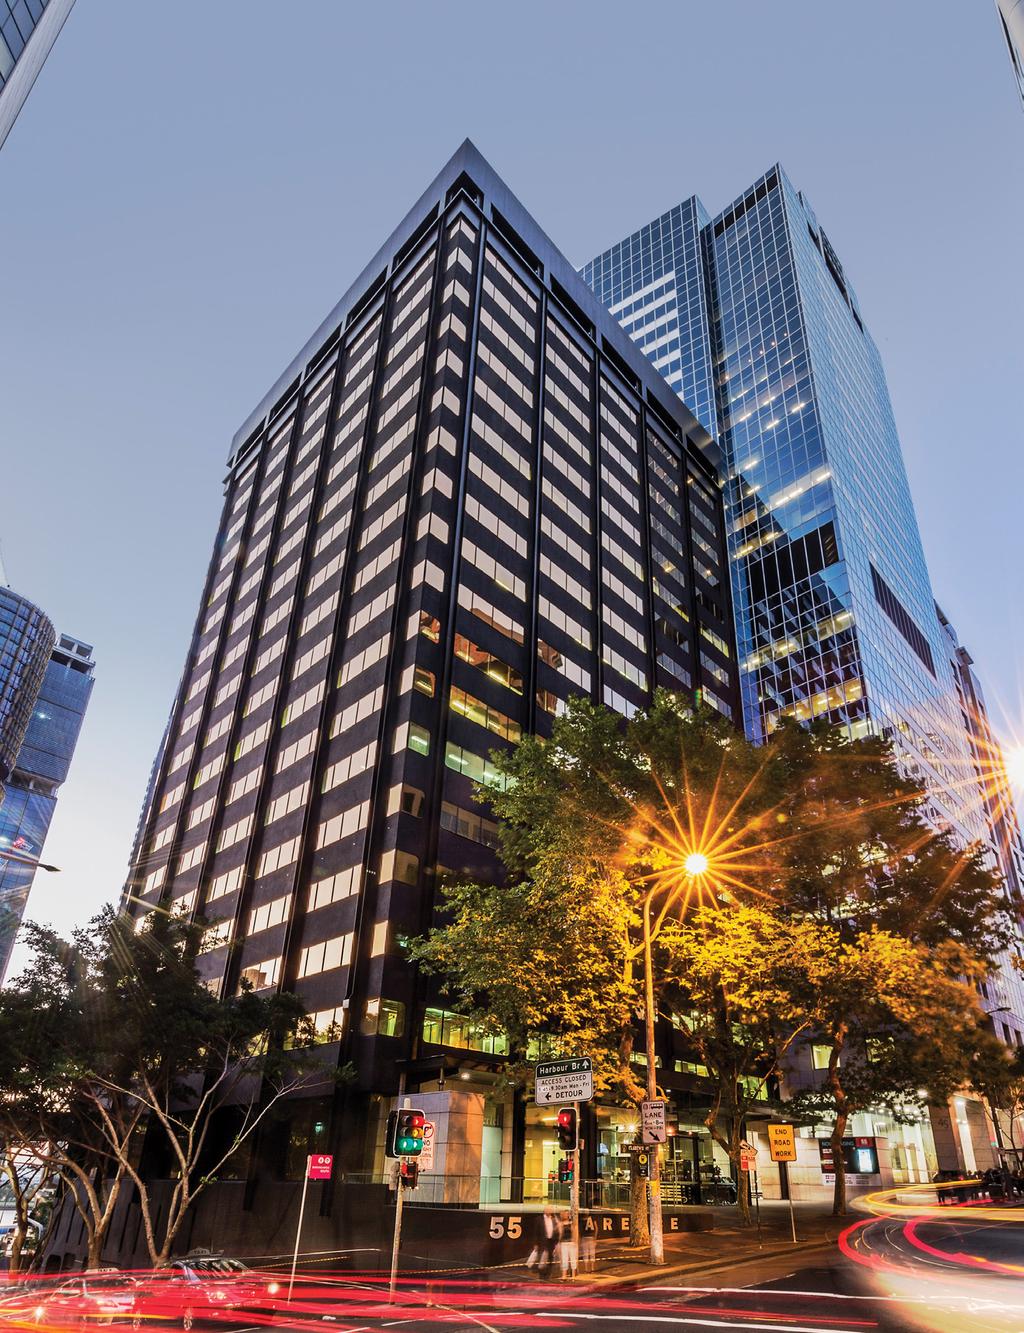 B grade outlook has the potential to affect the Prime part of the Sydney CBD market, as effective B grade rents begin to intersect Prime deals.